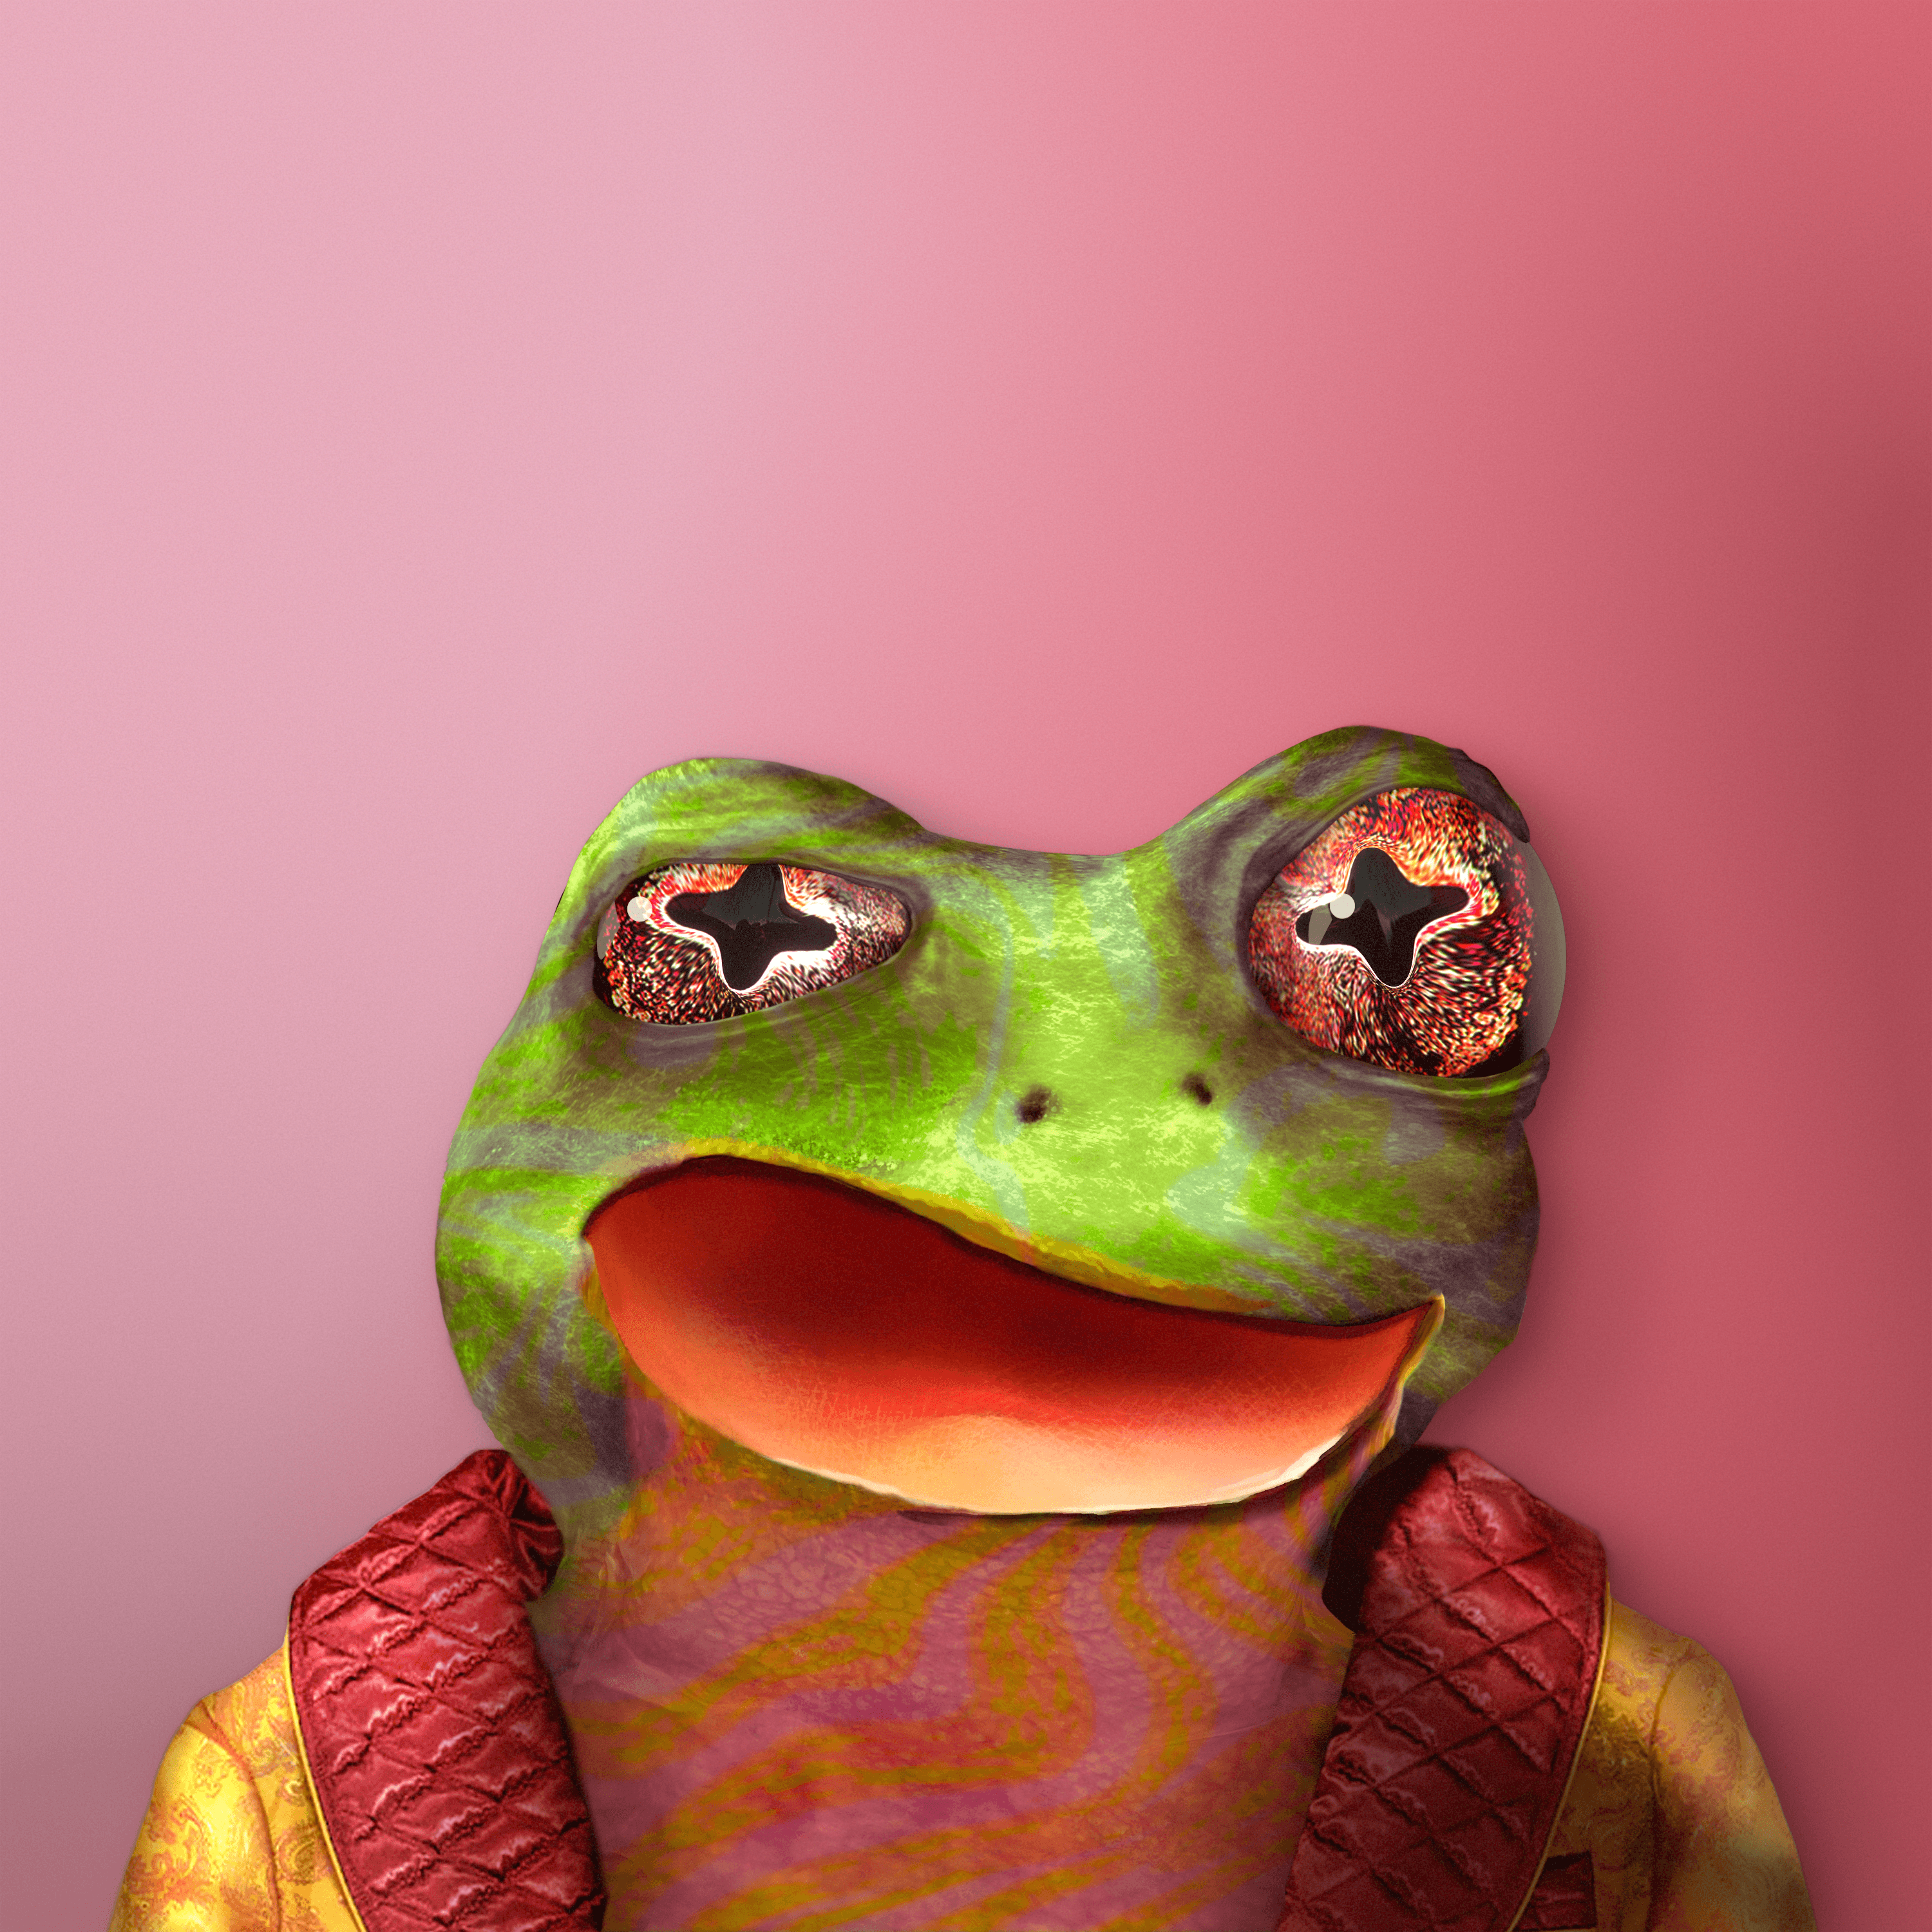 Notorious Frog #1141